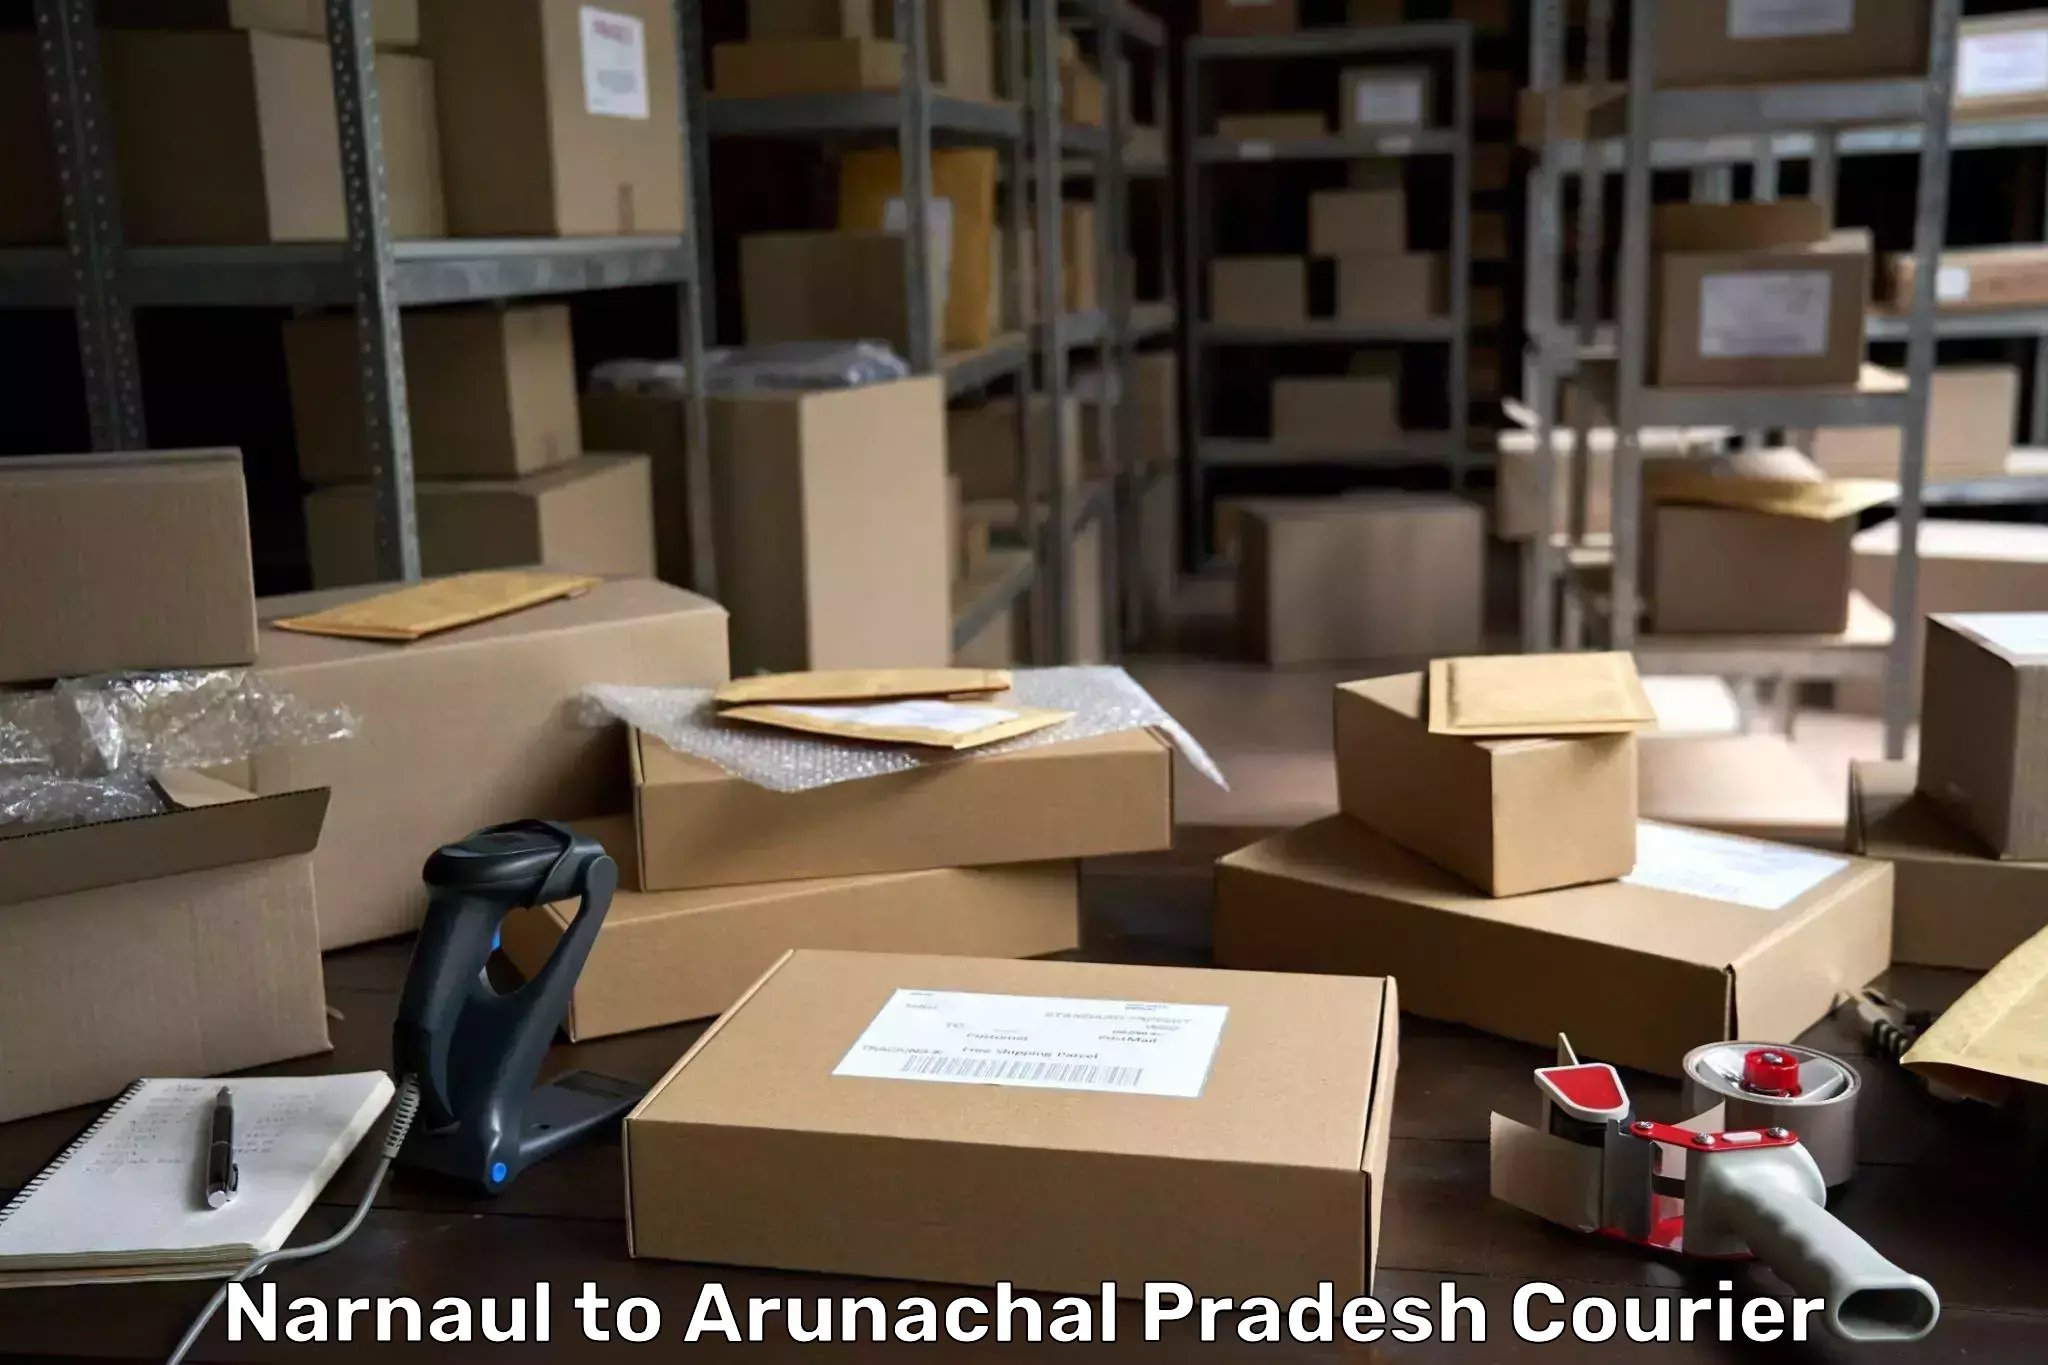 State-of-the-art courier technology Narnaul to Kurung Kumey